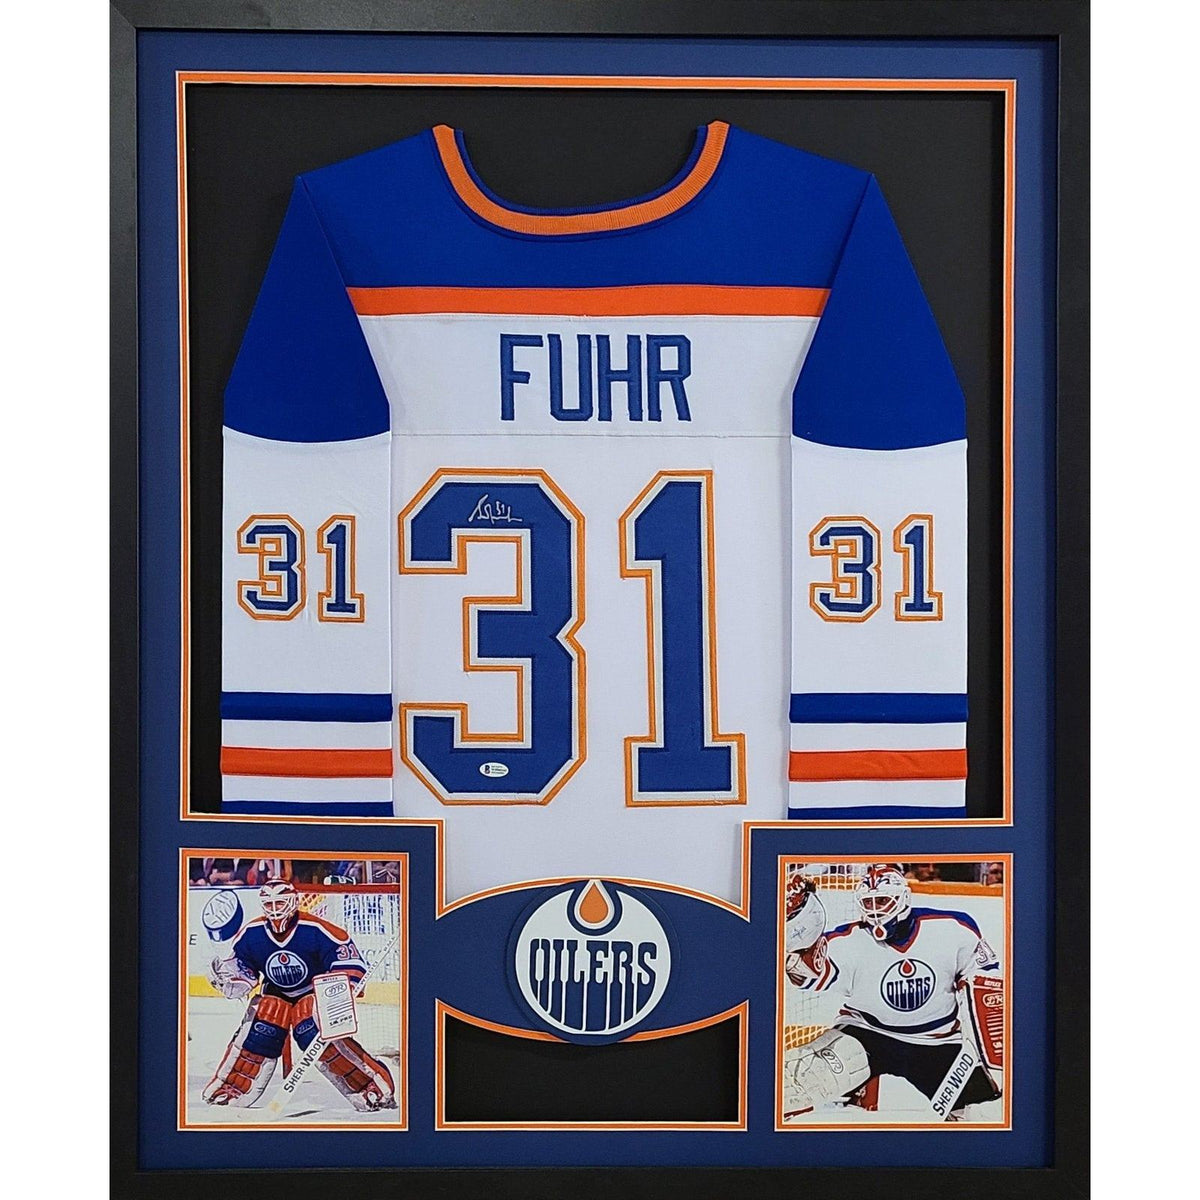 Grant Fuhr Framed White Jersey Beckett Autographed Signed Edmonton Oilers